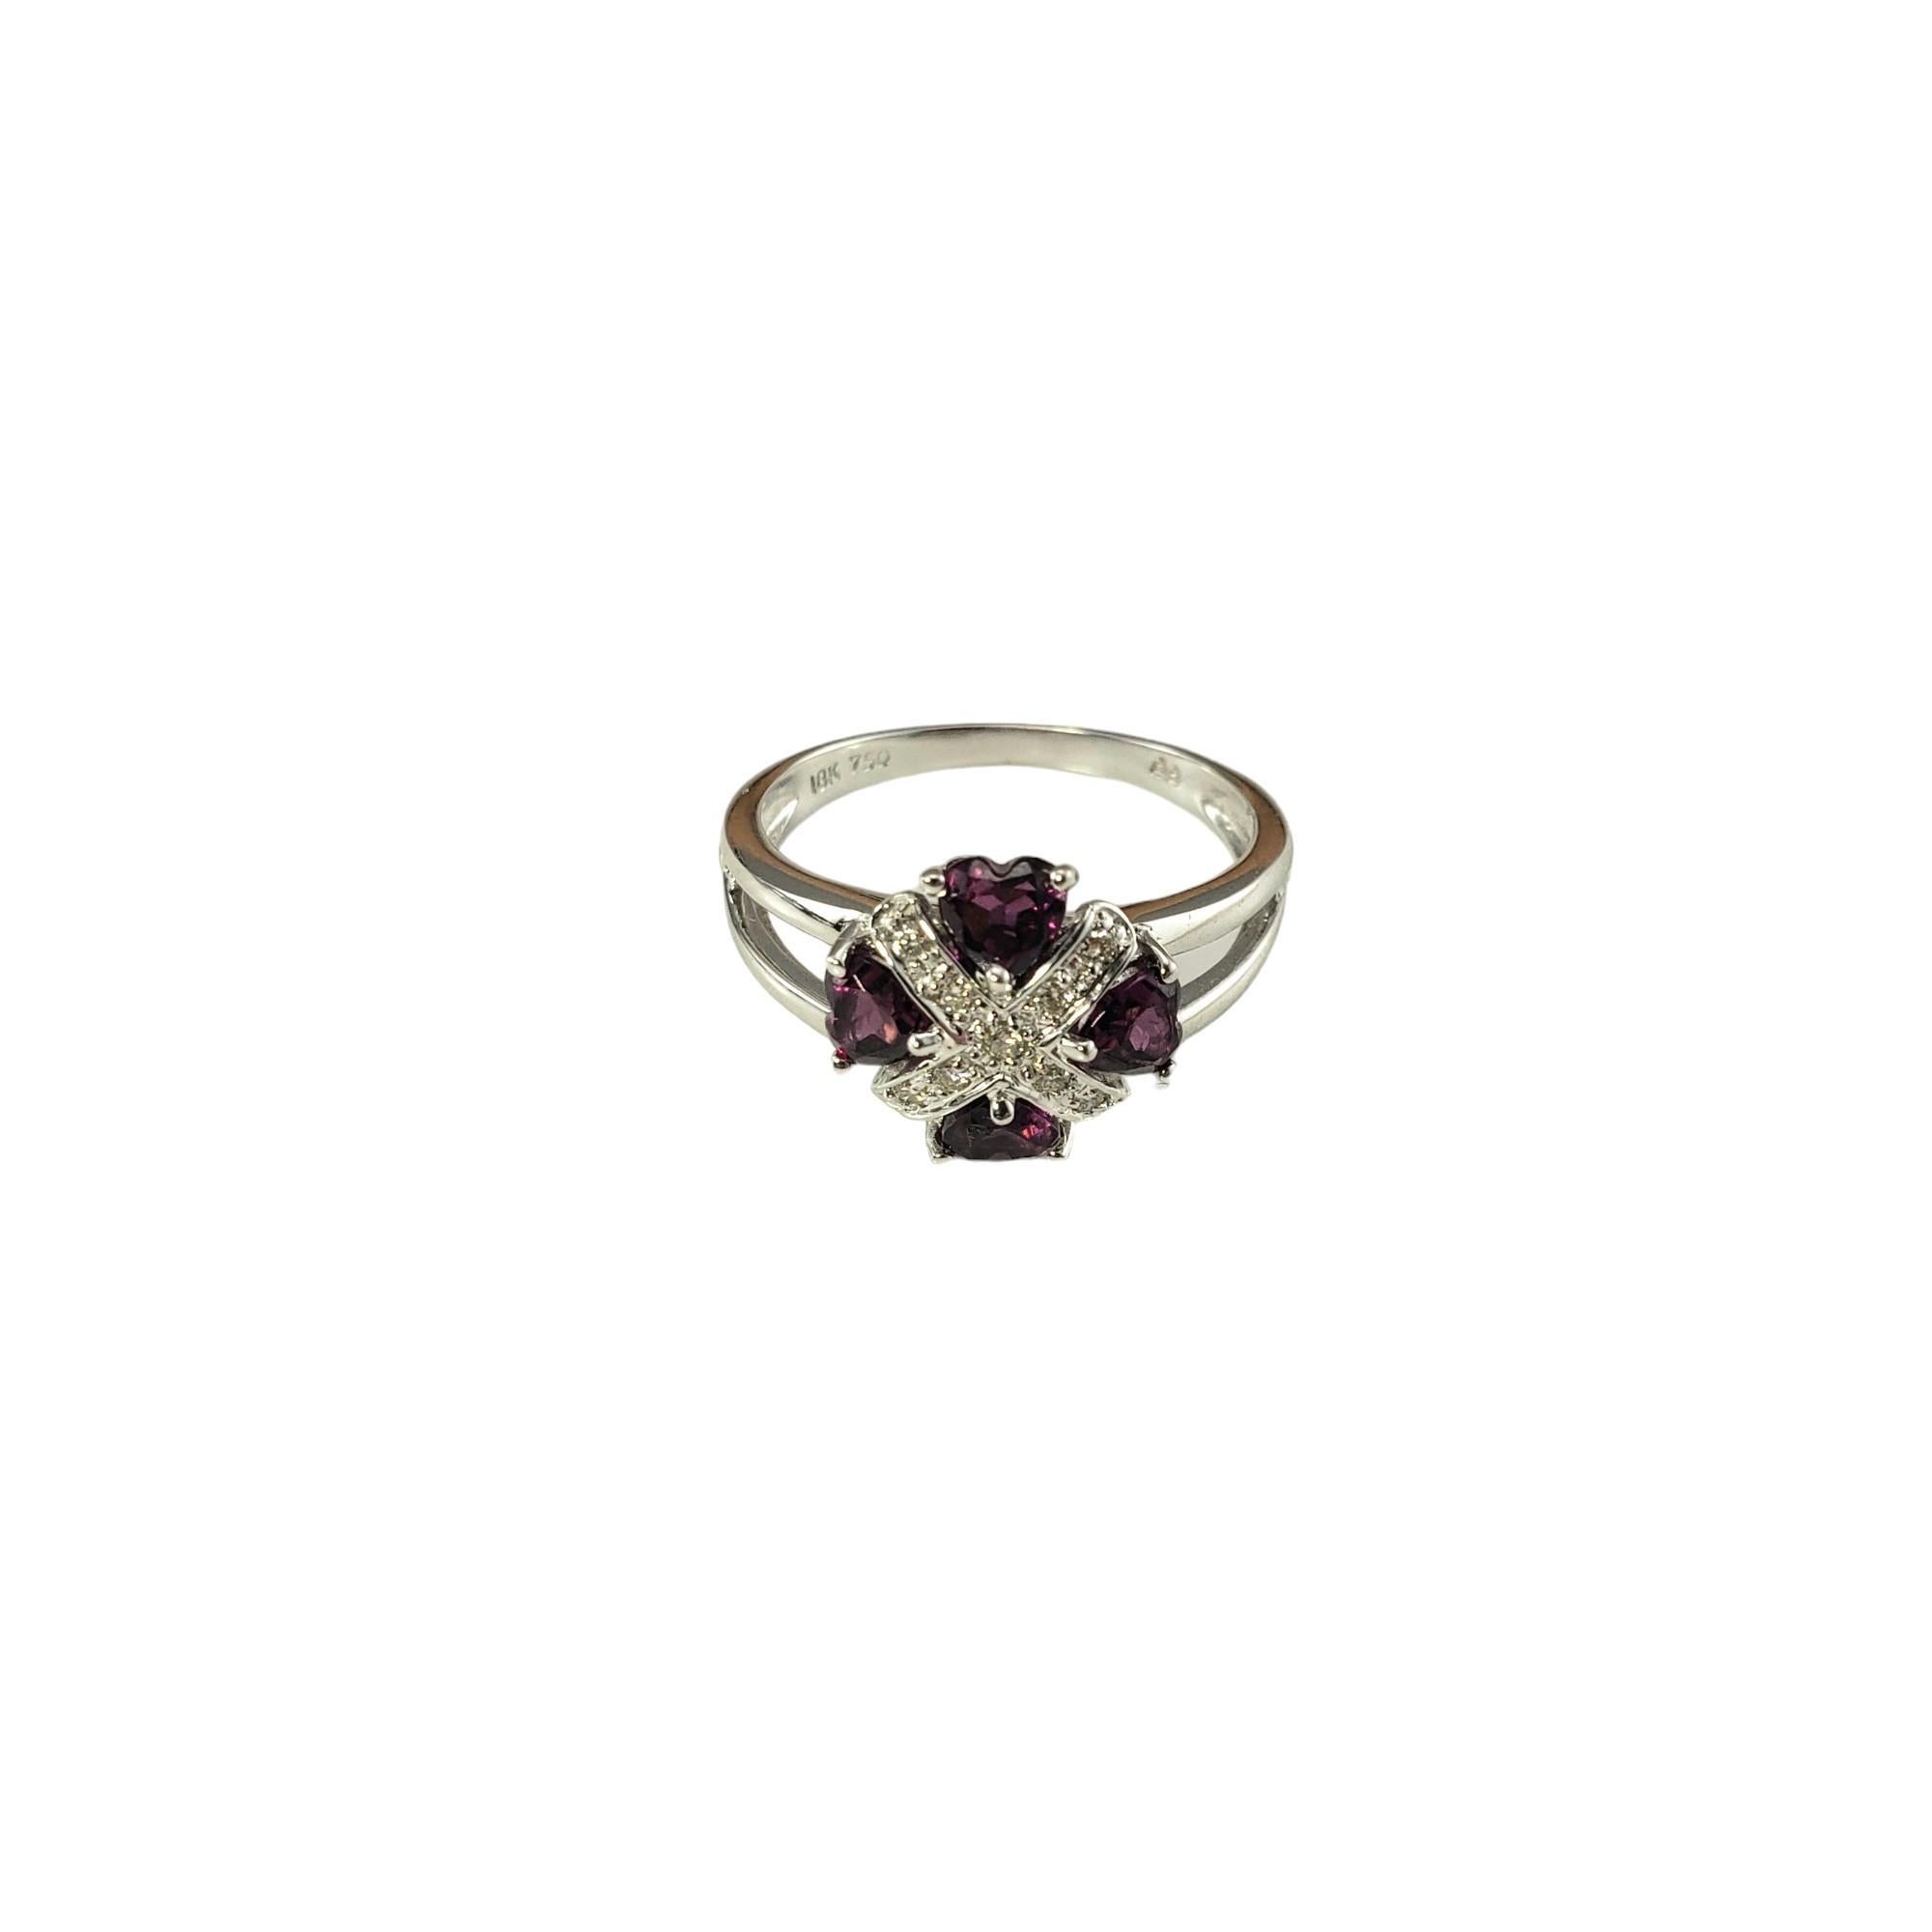 18K White Gold Garnet and Diamond Ring Size 7 JAGi Certified-

This lovely ring feature four heart shaped garnets and nine round brilliant cut diamonds set in classic 14K white gold.  Width: 11 mm.  Shank: 2 mm.

Total garnet weight: 1.08

Total